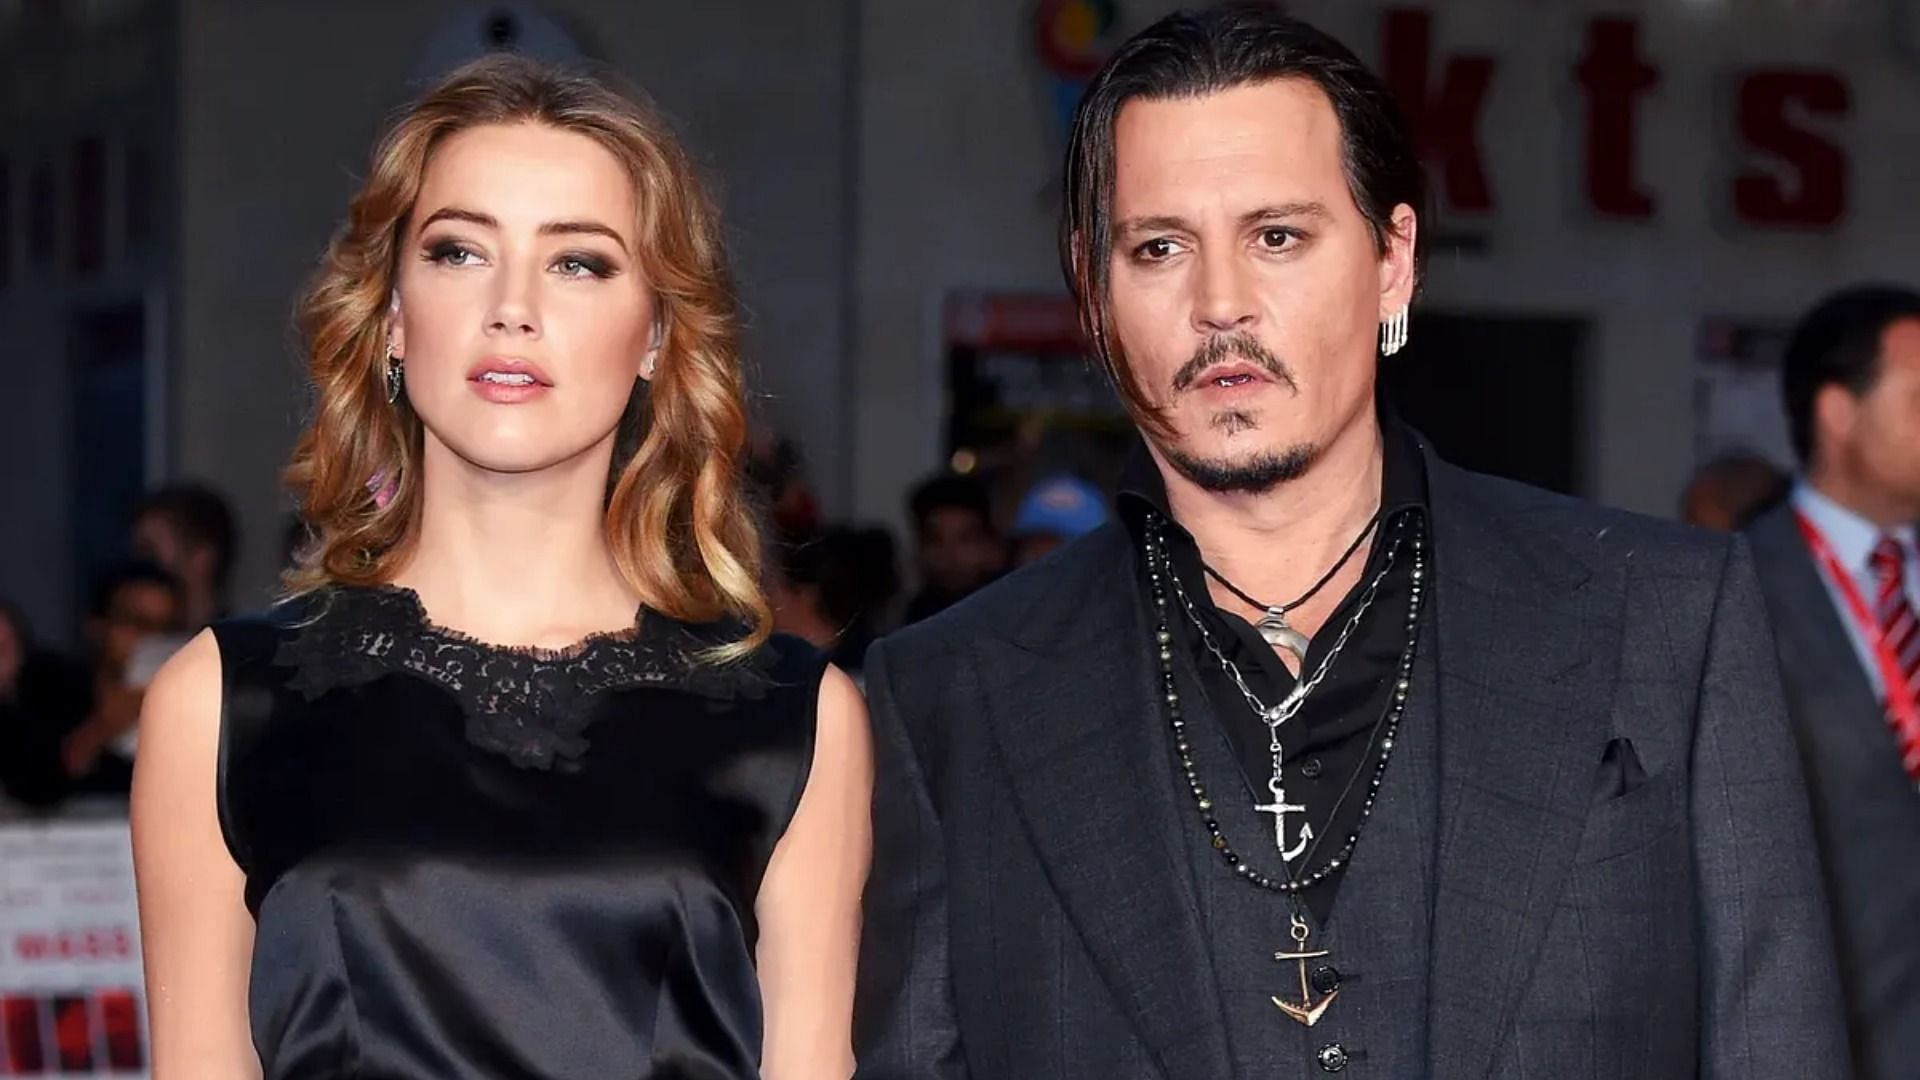 Amber Heard and Johnny Depp met while shooting The Rum Diary. (Image via Getty Images/Karwai Tang)